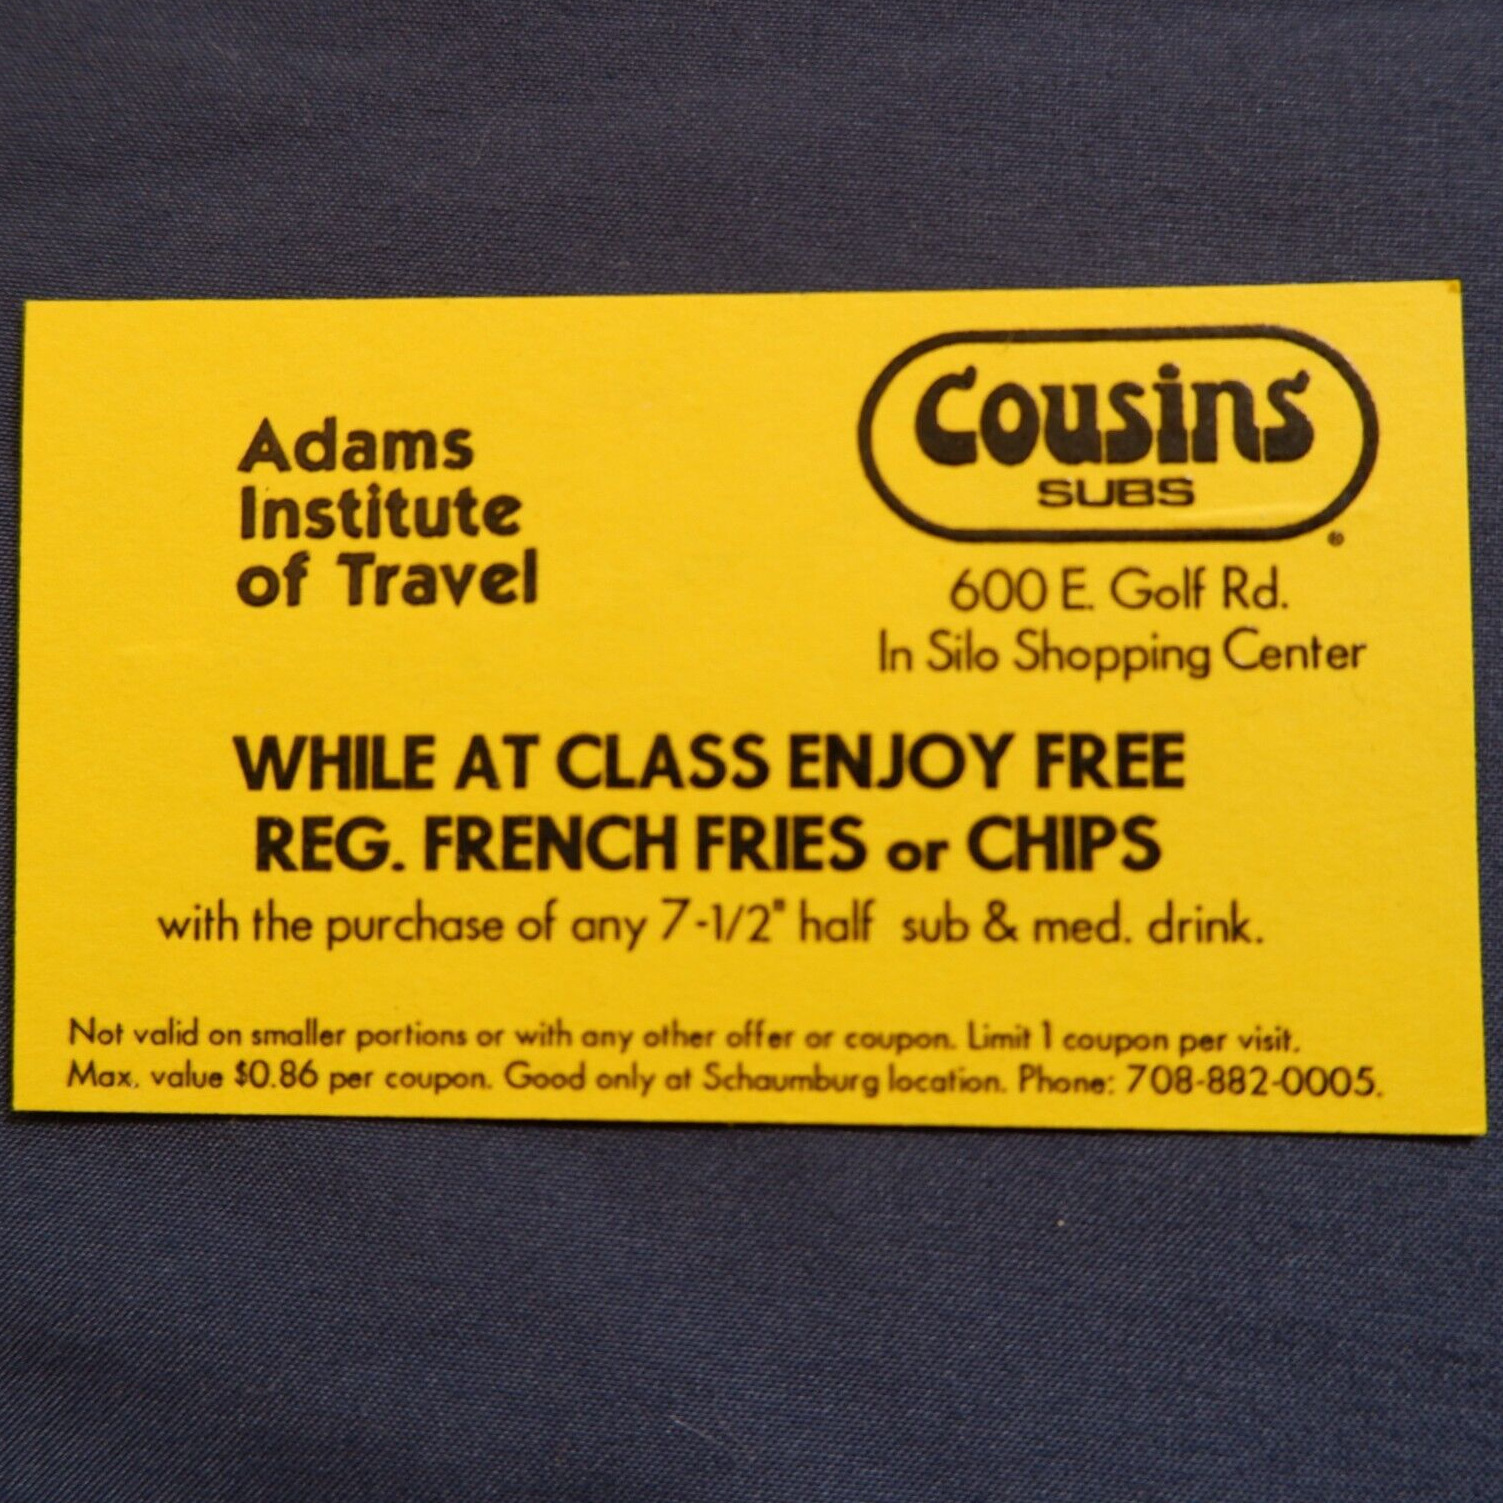 Adams Institute of Travel Cousins Subs Coupon Business Card-Schaumburg IL